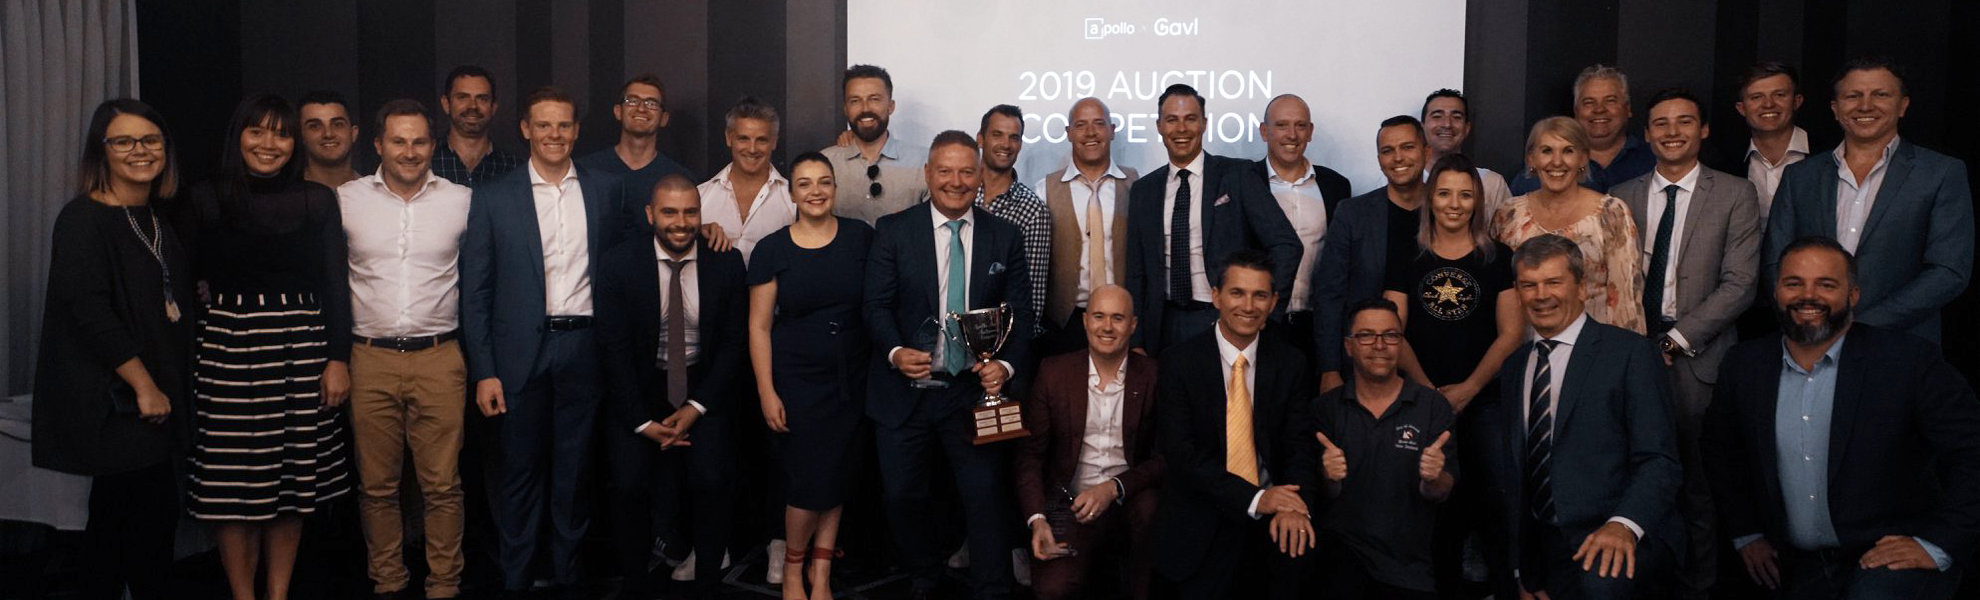 Team photo of contestants from the Auction Competition held by Apollo Auctions in 2019